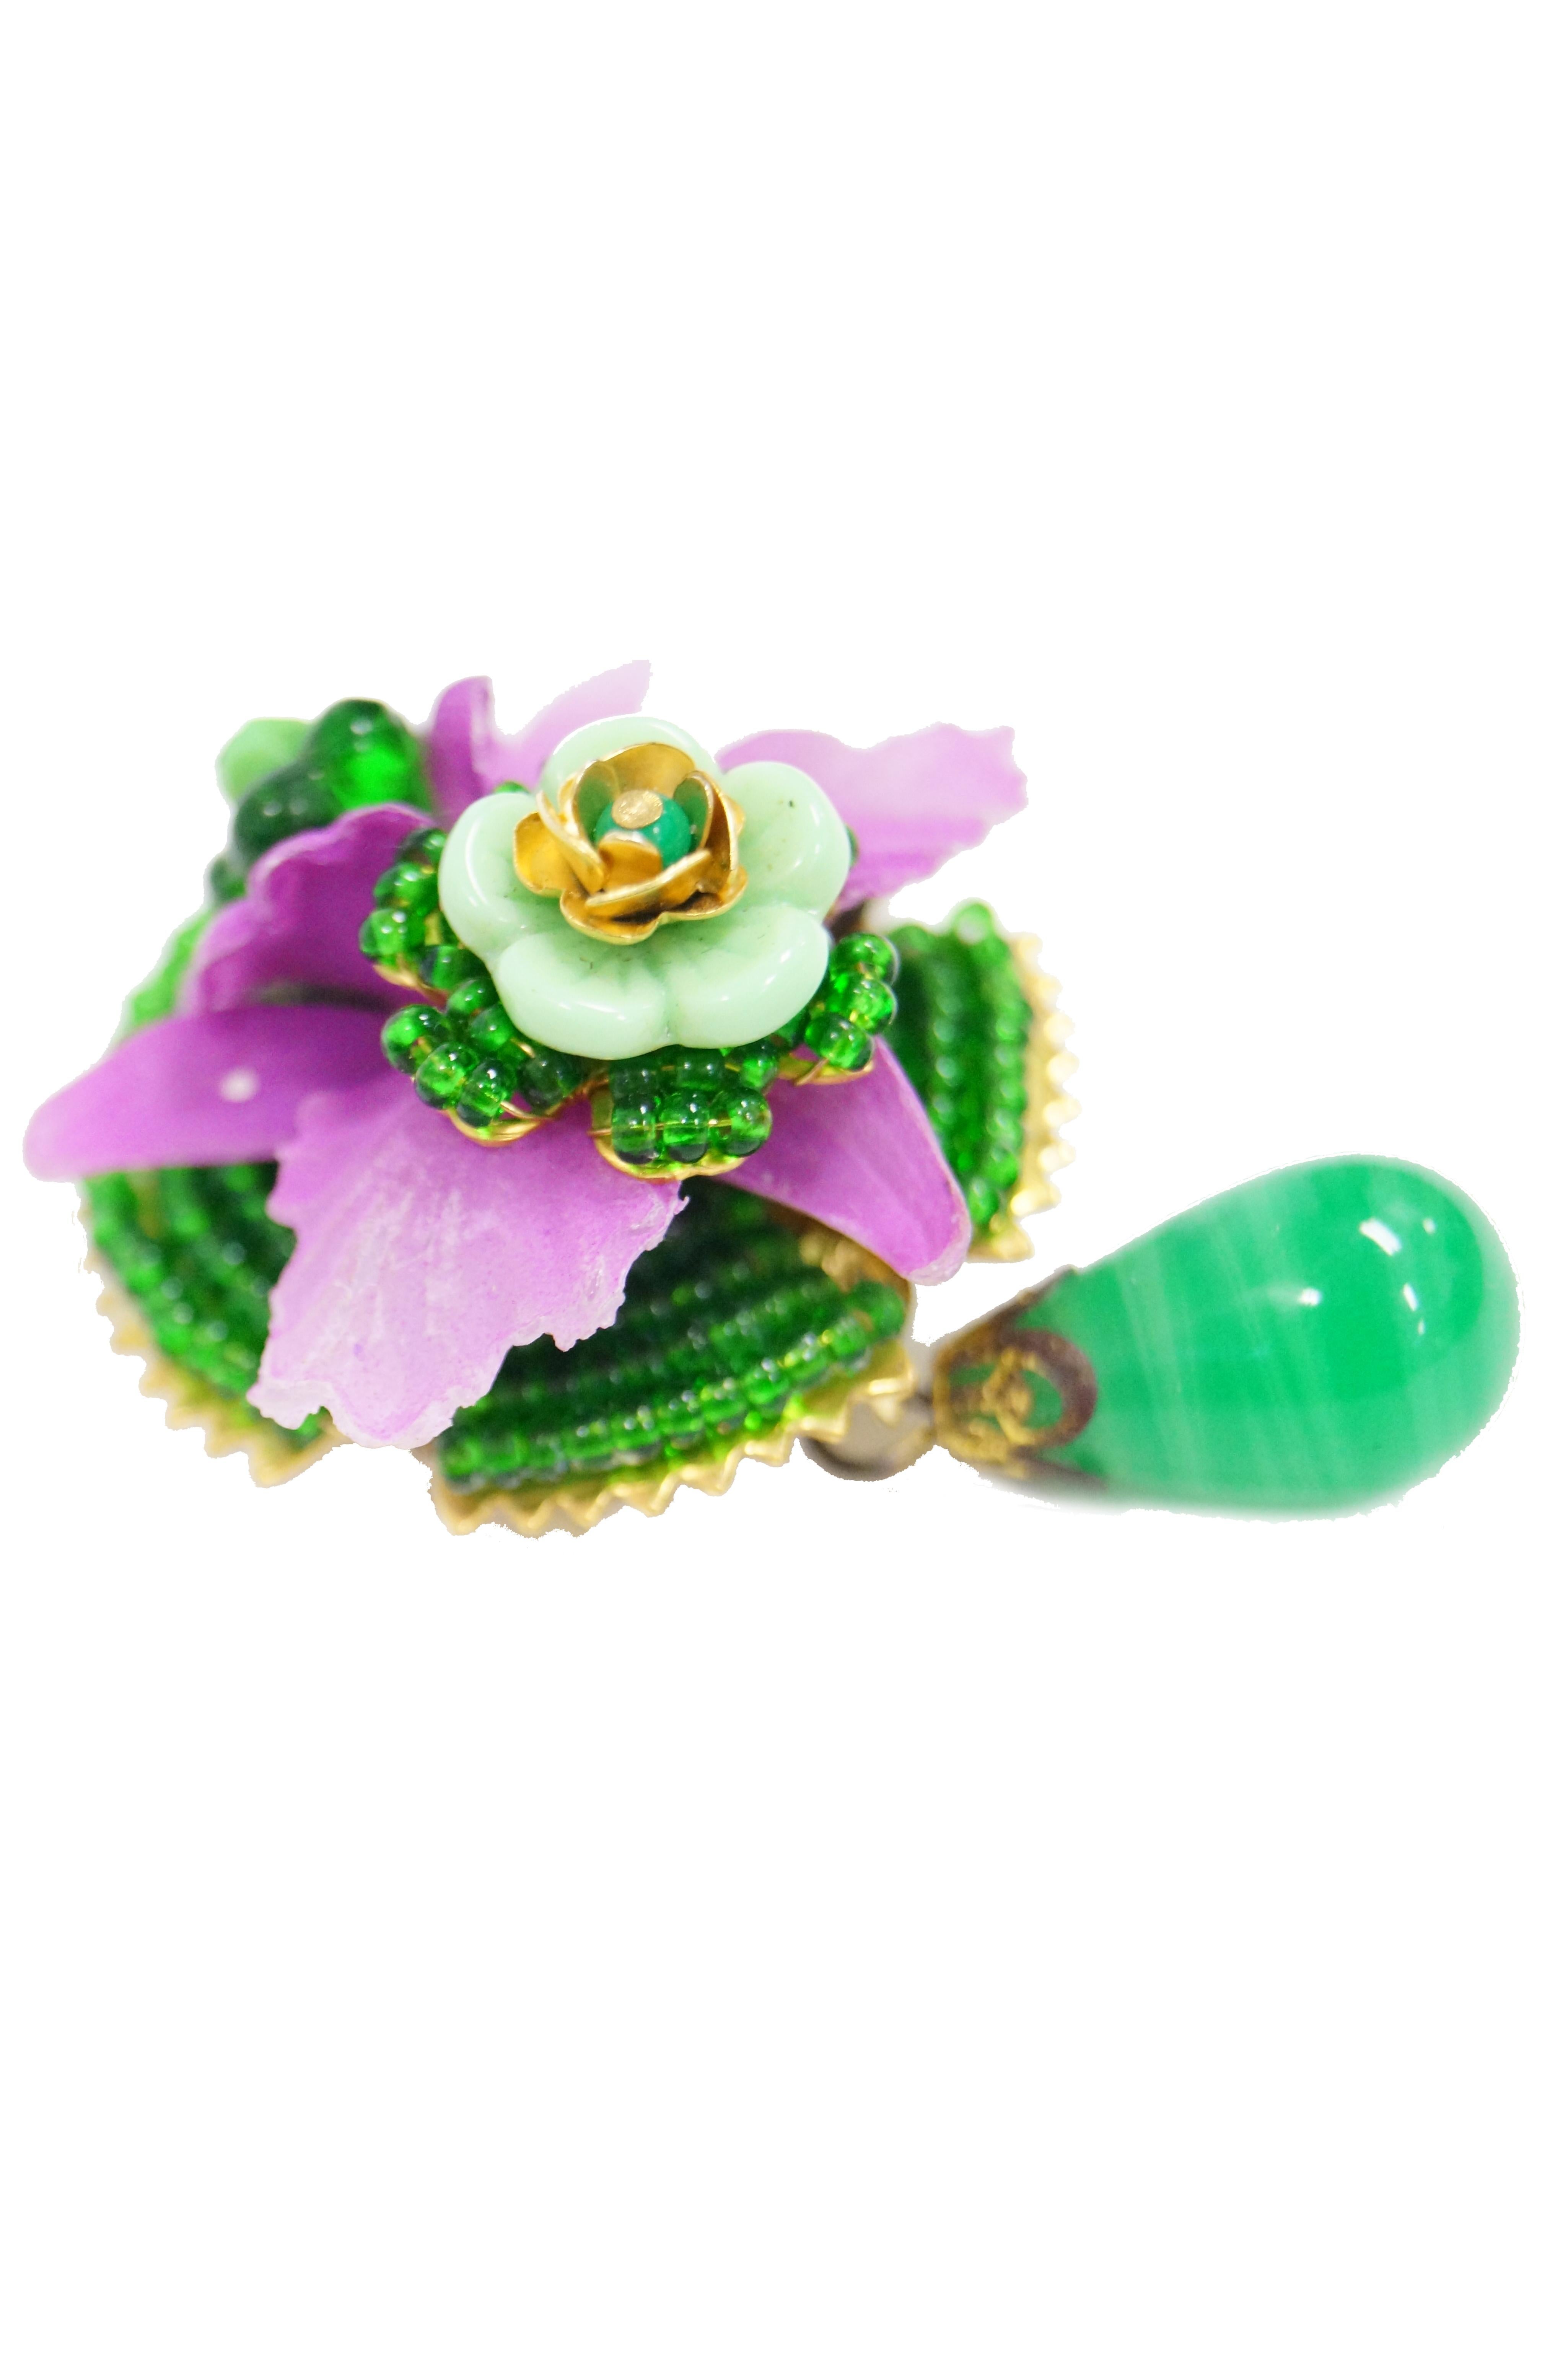 Bright and cheery floral brooch by Stanley Hagler! This intricate floral brooch is composed of a bright green glass bead base supporting a frosted purple orchid upon which lay two more green and gold beaded flowers. The body of the brooch is